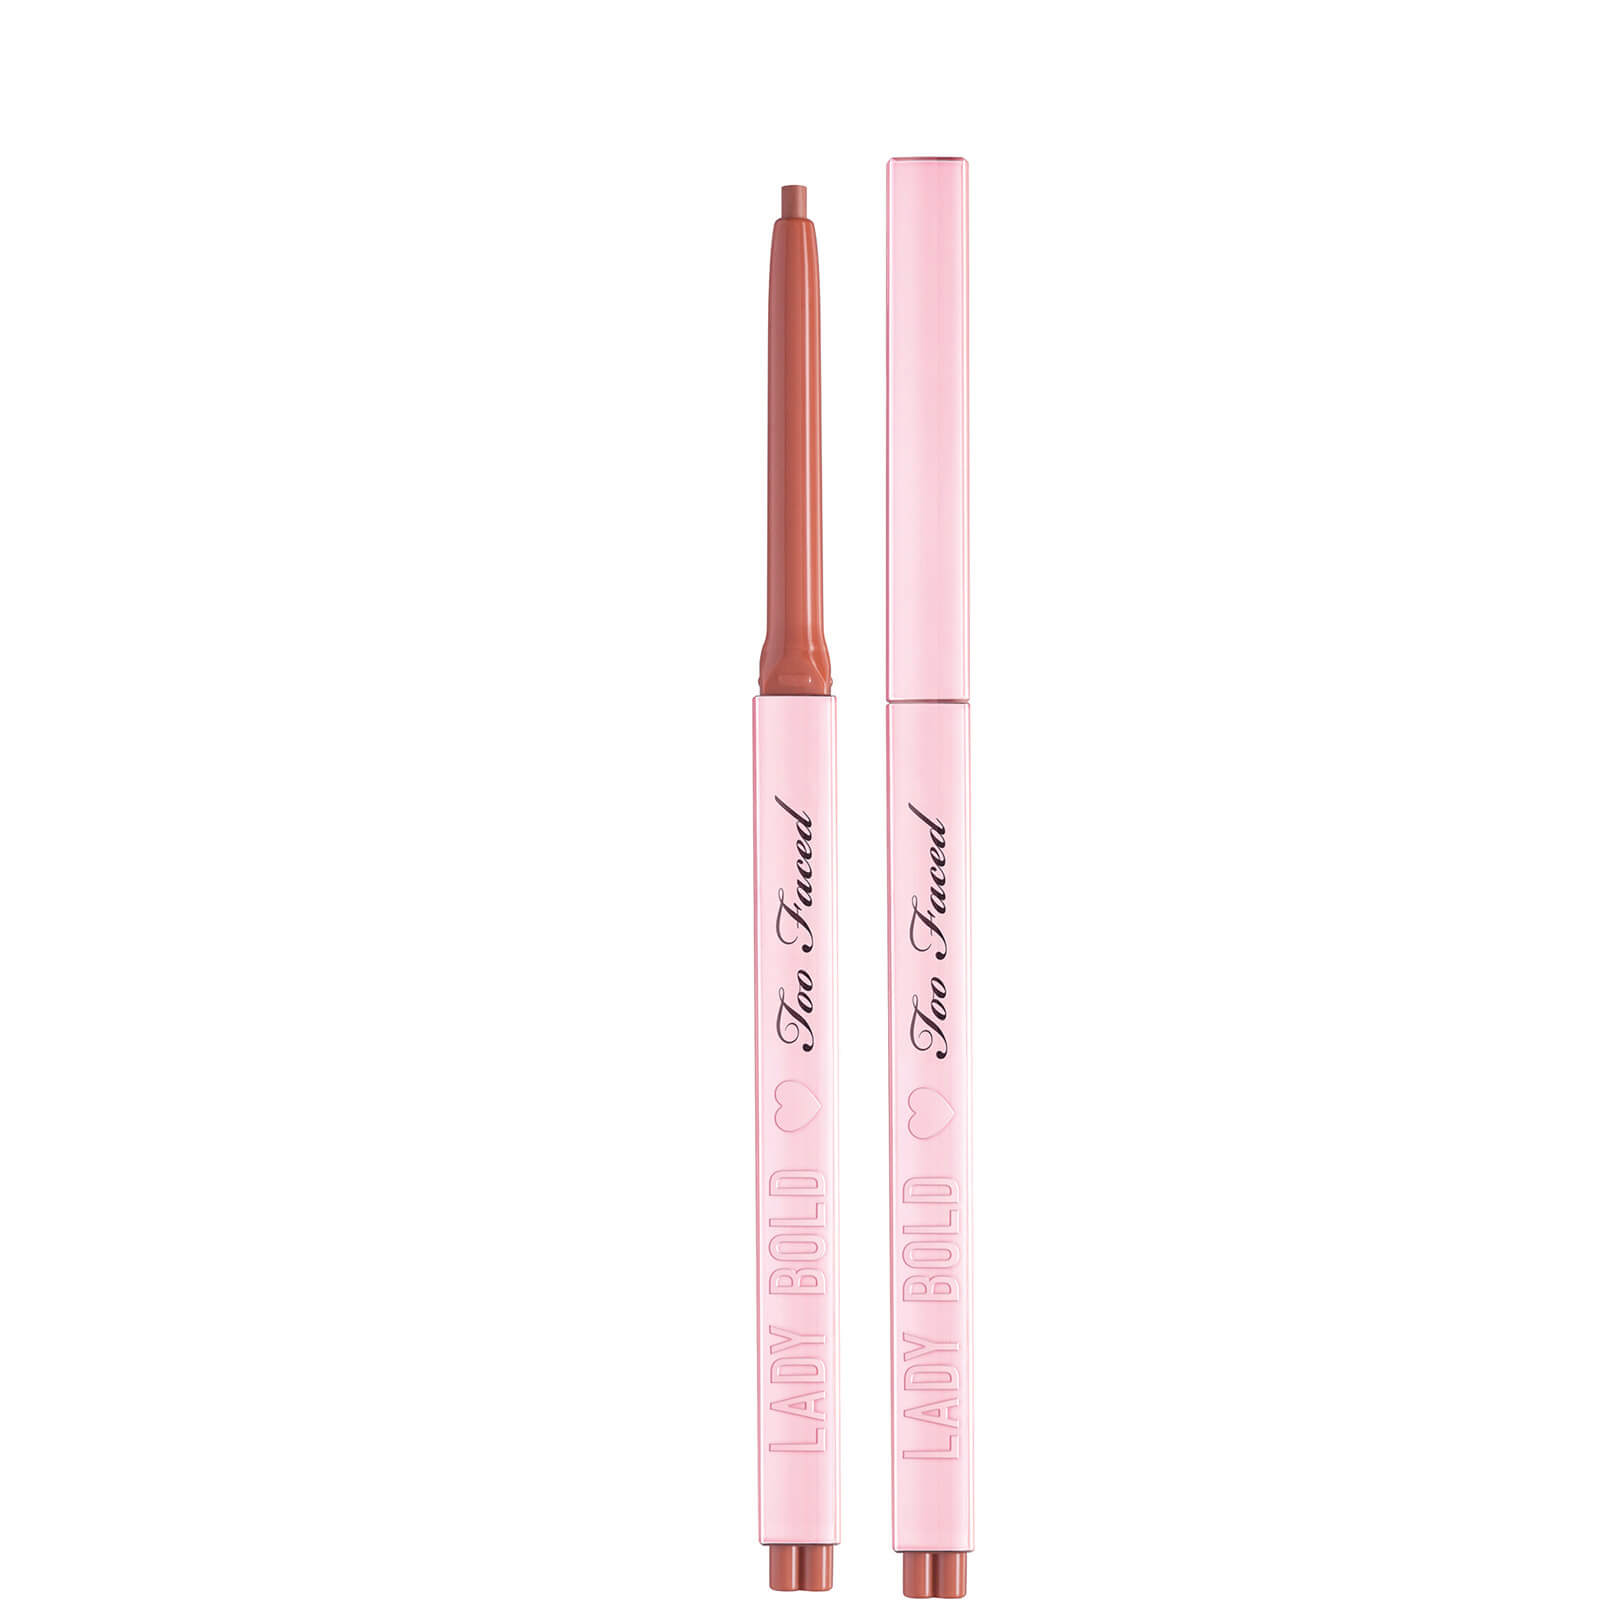 Too Faced Lady Bold Demi-Matte Lip Liner 0.23g (Various Shades) - Limitless Life